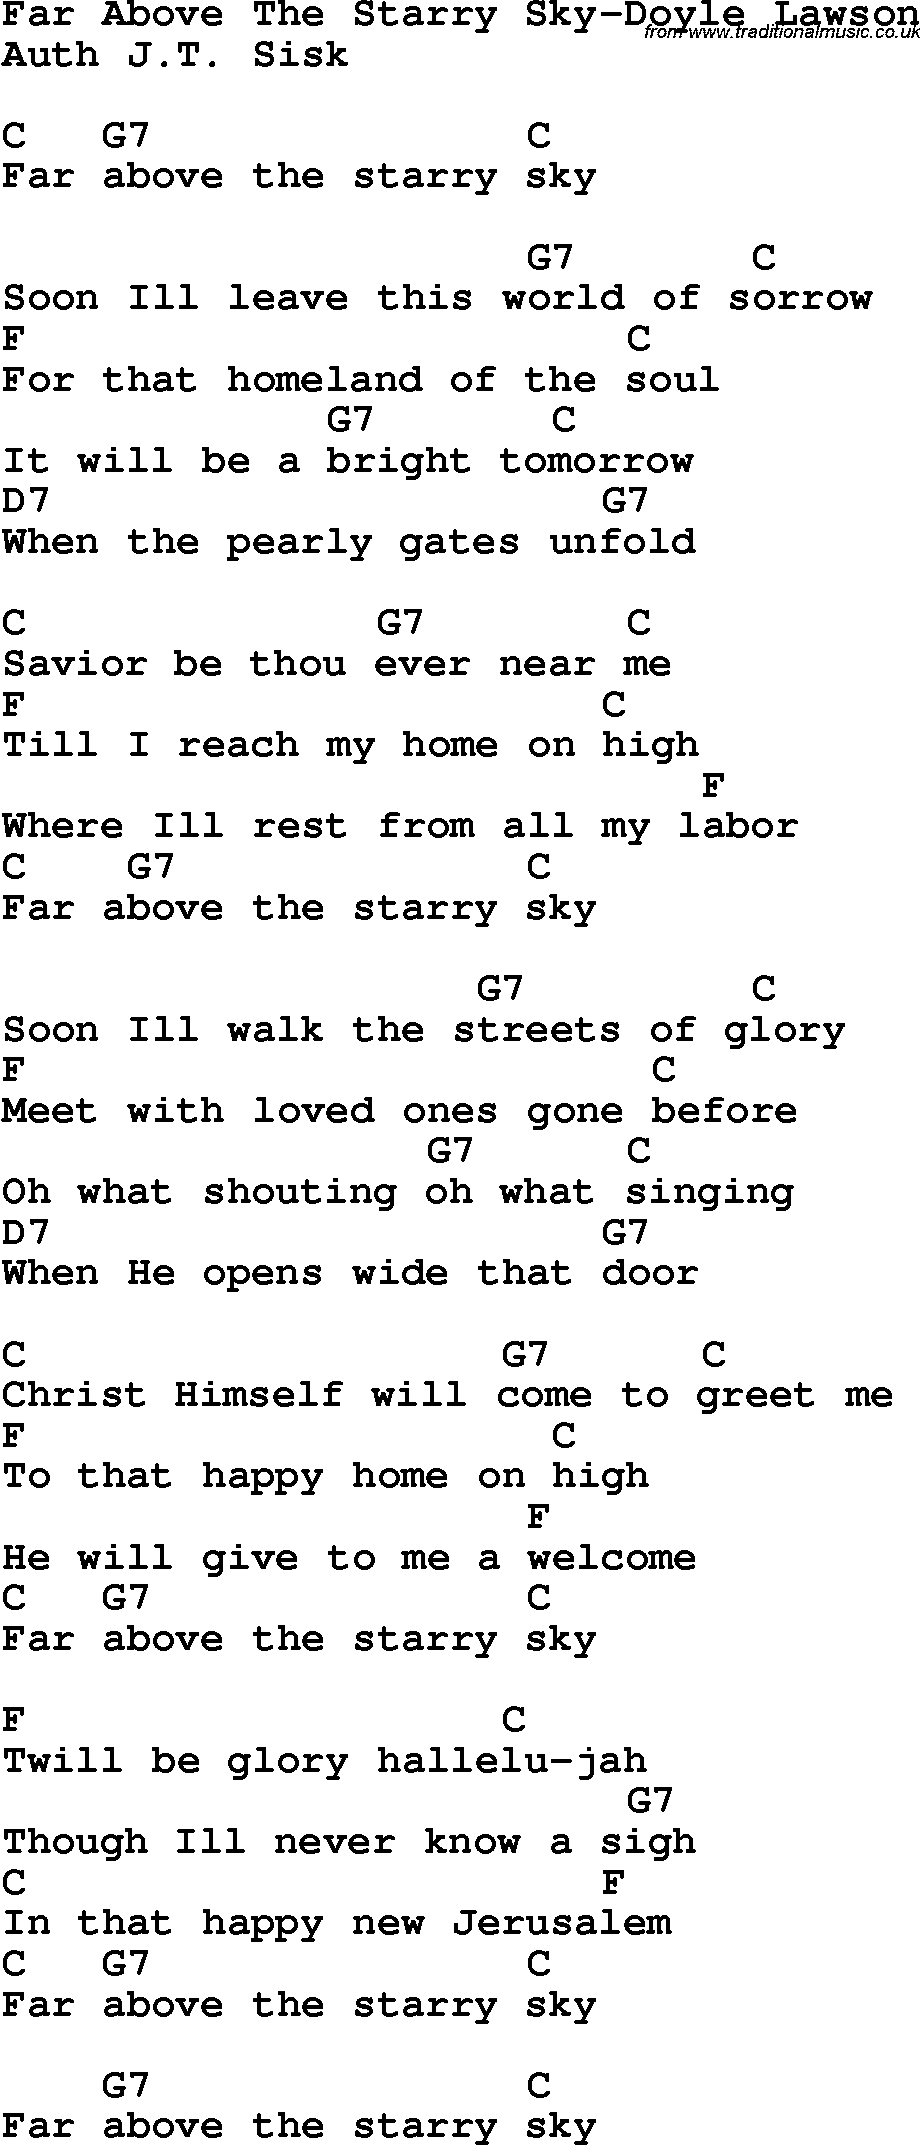 Country, Southern and Bluegrass Gospel Song Far Above The Starry Sky-Doyle Lawson lyrics and chords